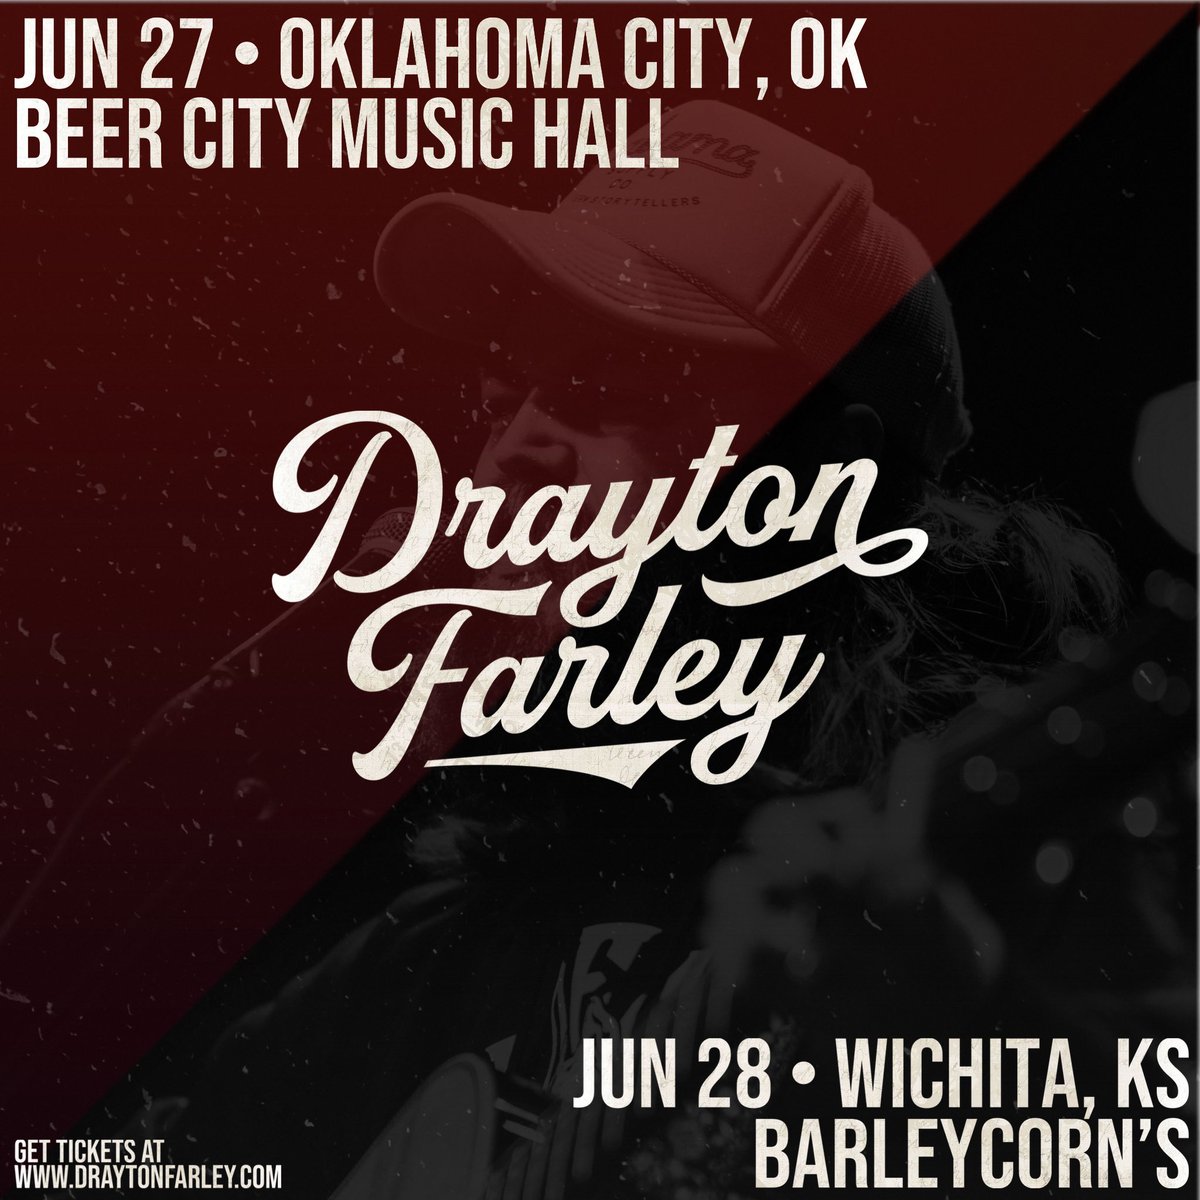 Hey y’all, I’ve added two more shows to the schedule! JUN 27 • OKC, OK at @beercityokc JUN 28 • Wichita, KS at @BarleycornsICT Tickets are on sale now at draytonfarley.com